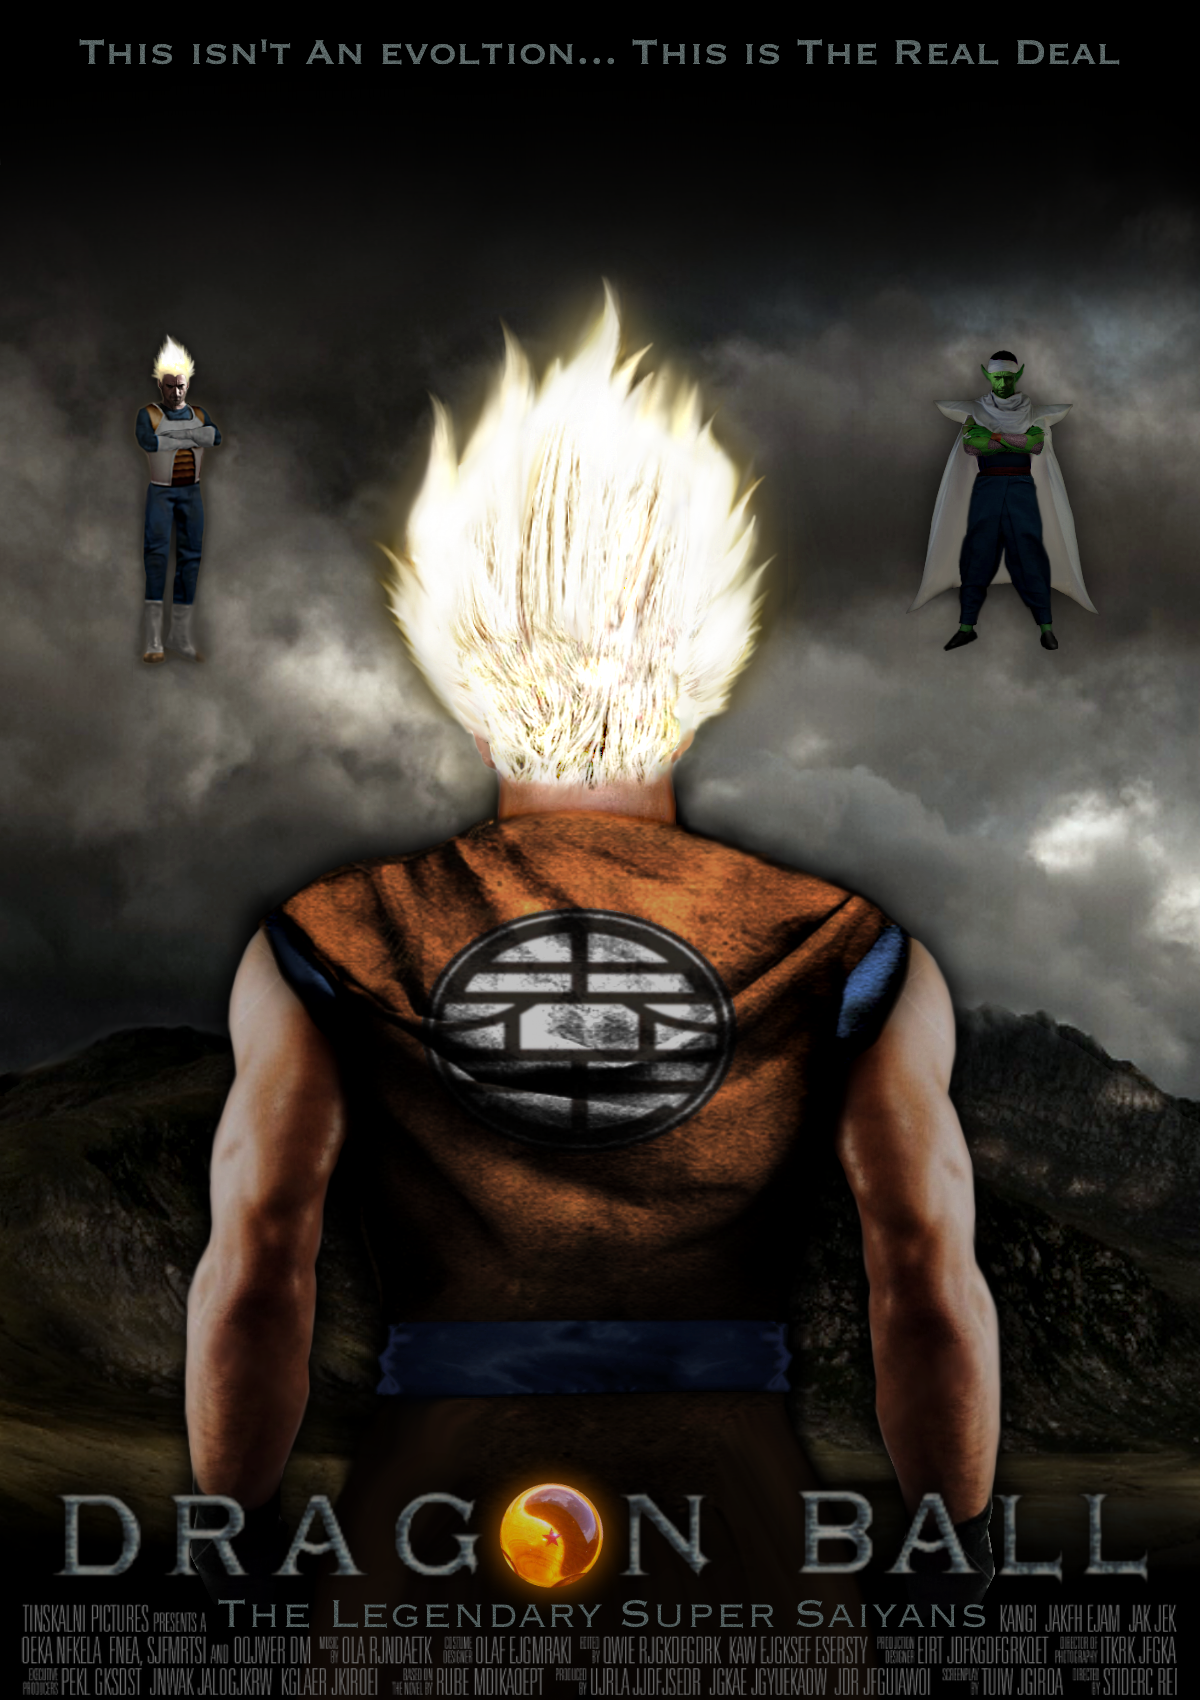 Dragon Ball Live action movie poster by Tony-Antwonio on ...